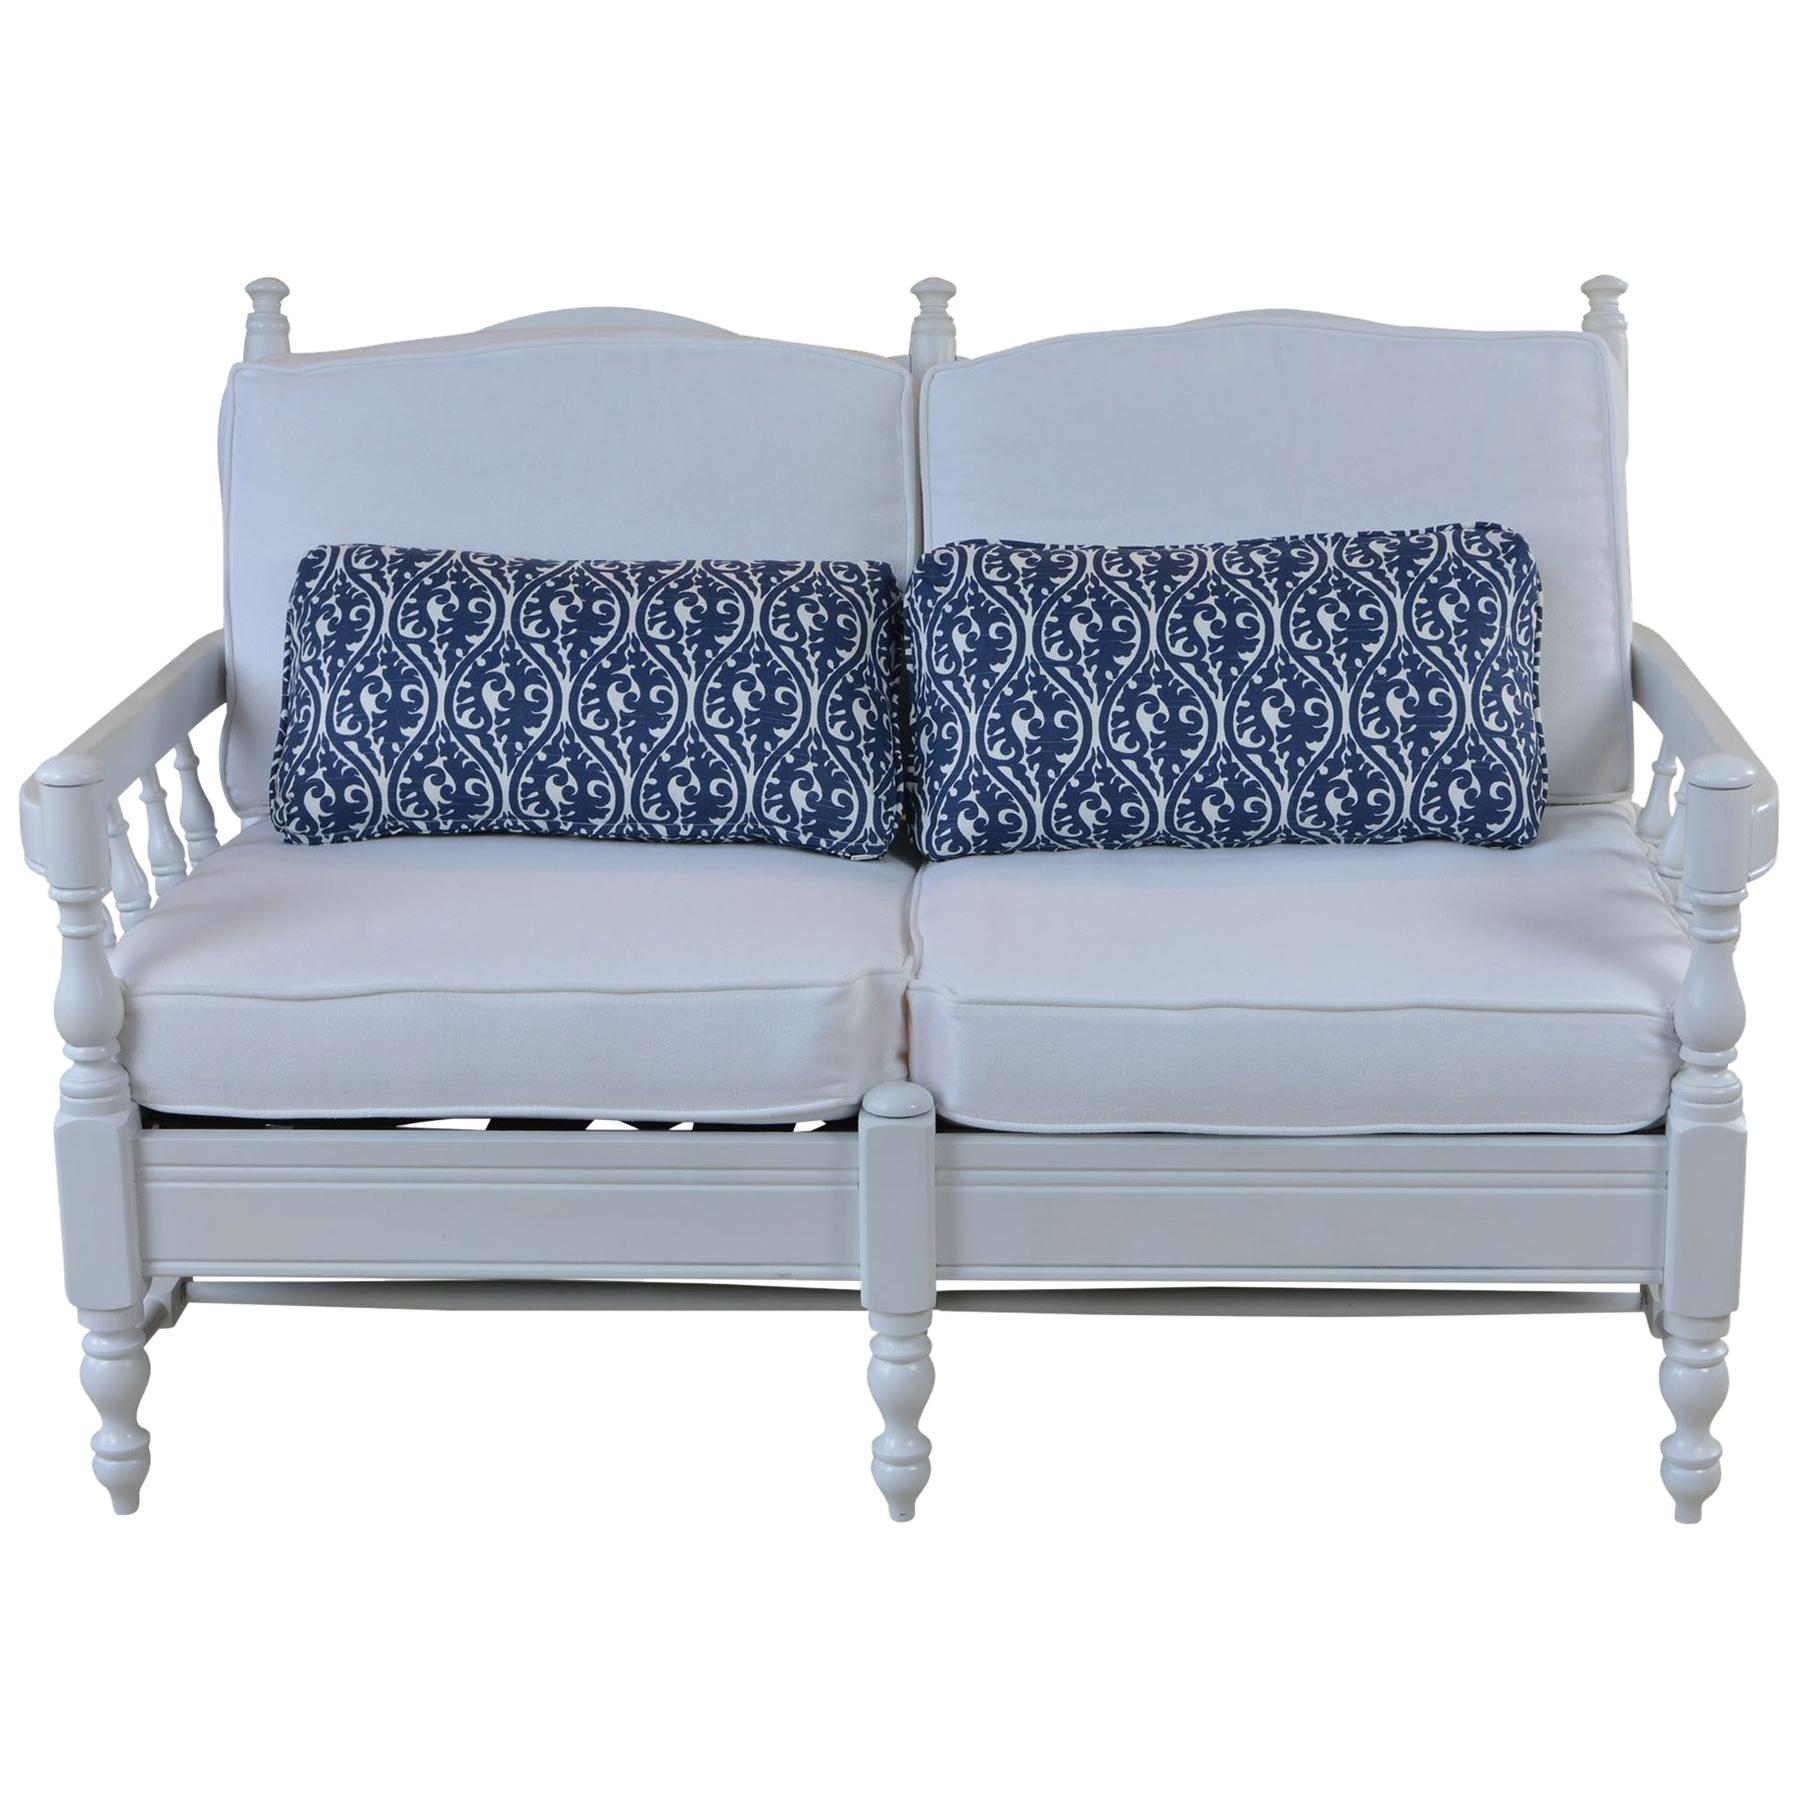 French Provincial Style 2 Person White Settee For Sale